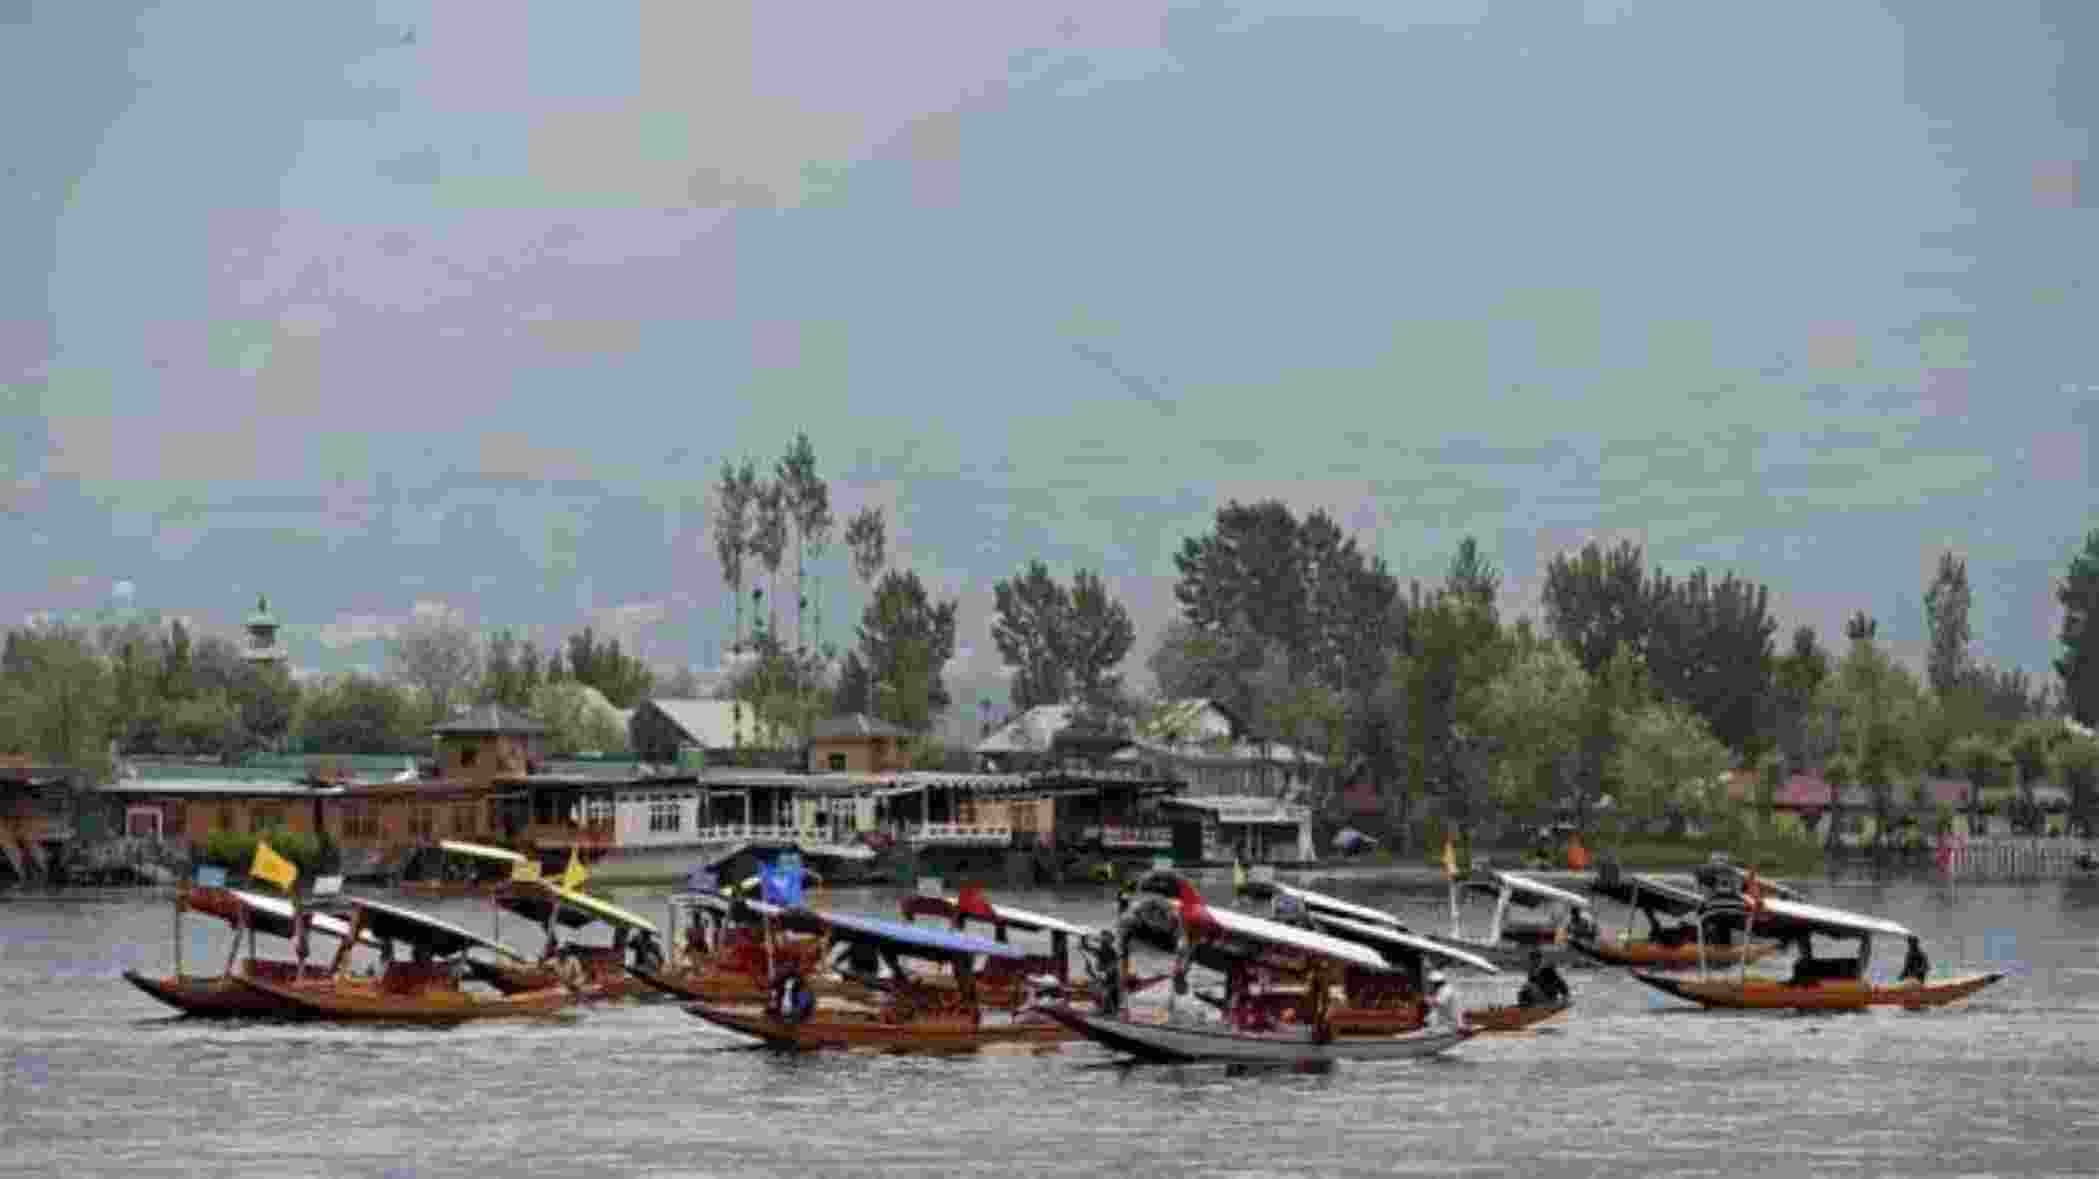 Speaking at the two-day Jammu and Kashmir Tourism Development Conclave-2024 at Sher-i-Kashmir Conference Centre by Dal Lake, Sinha highlighted government efforts to develop a sustainable tourism model to make J&K a leading global tourist destination.